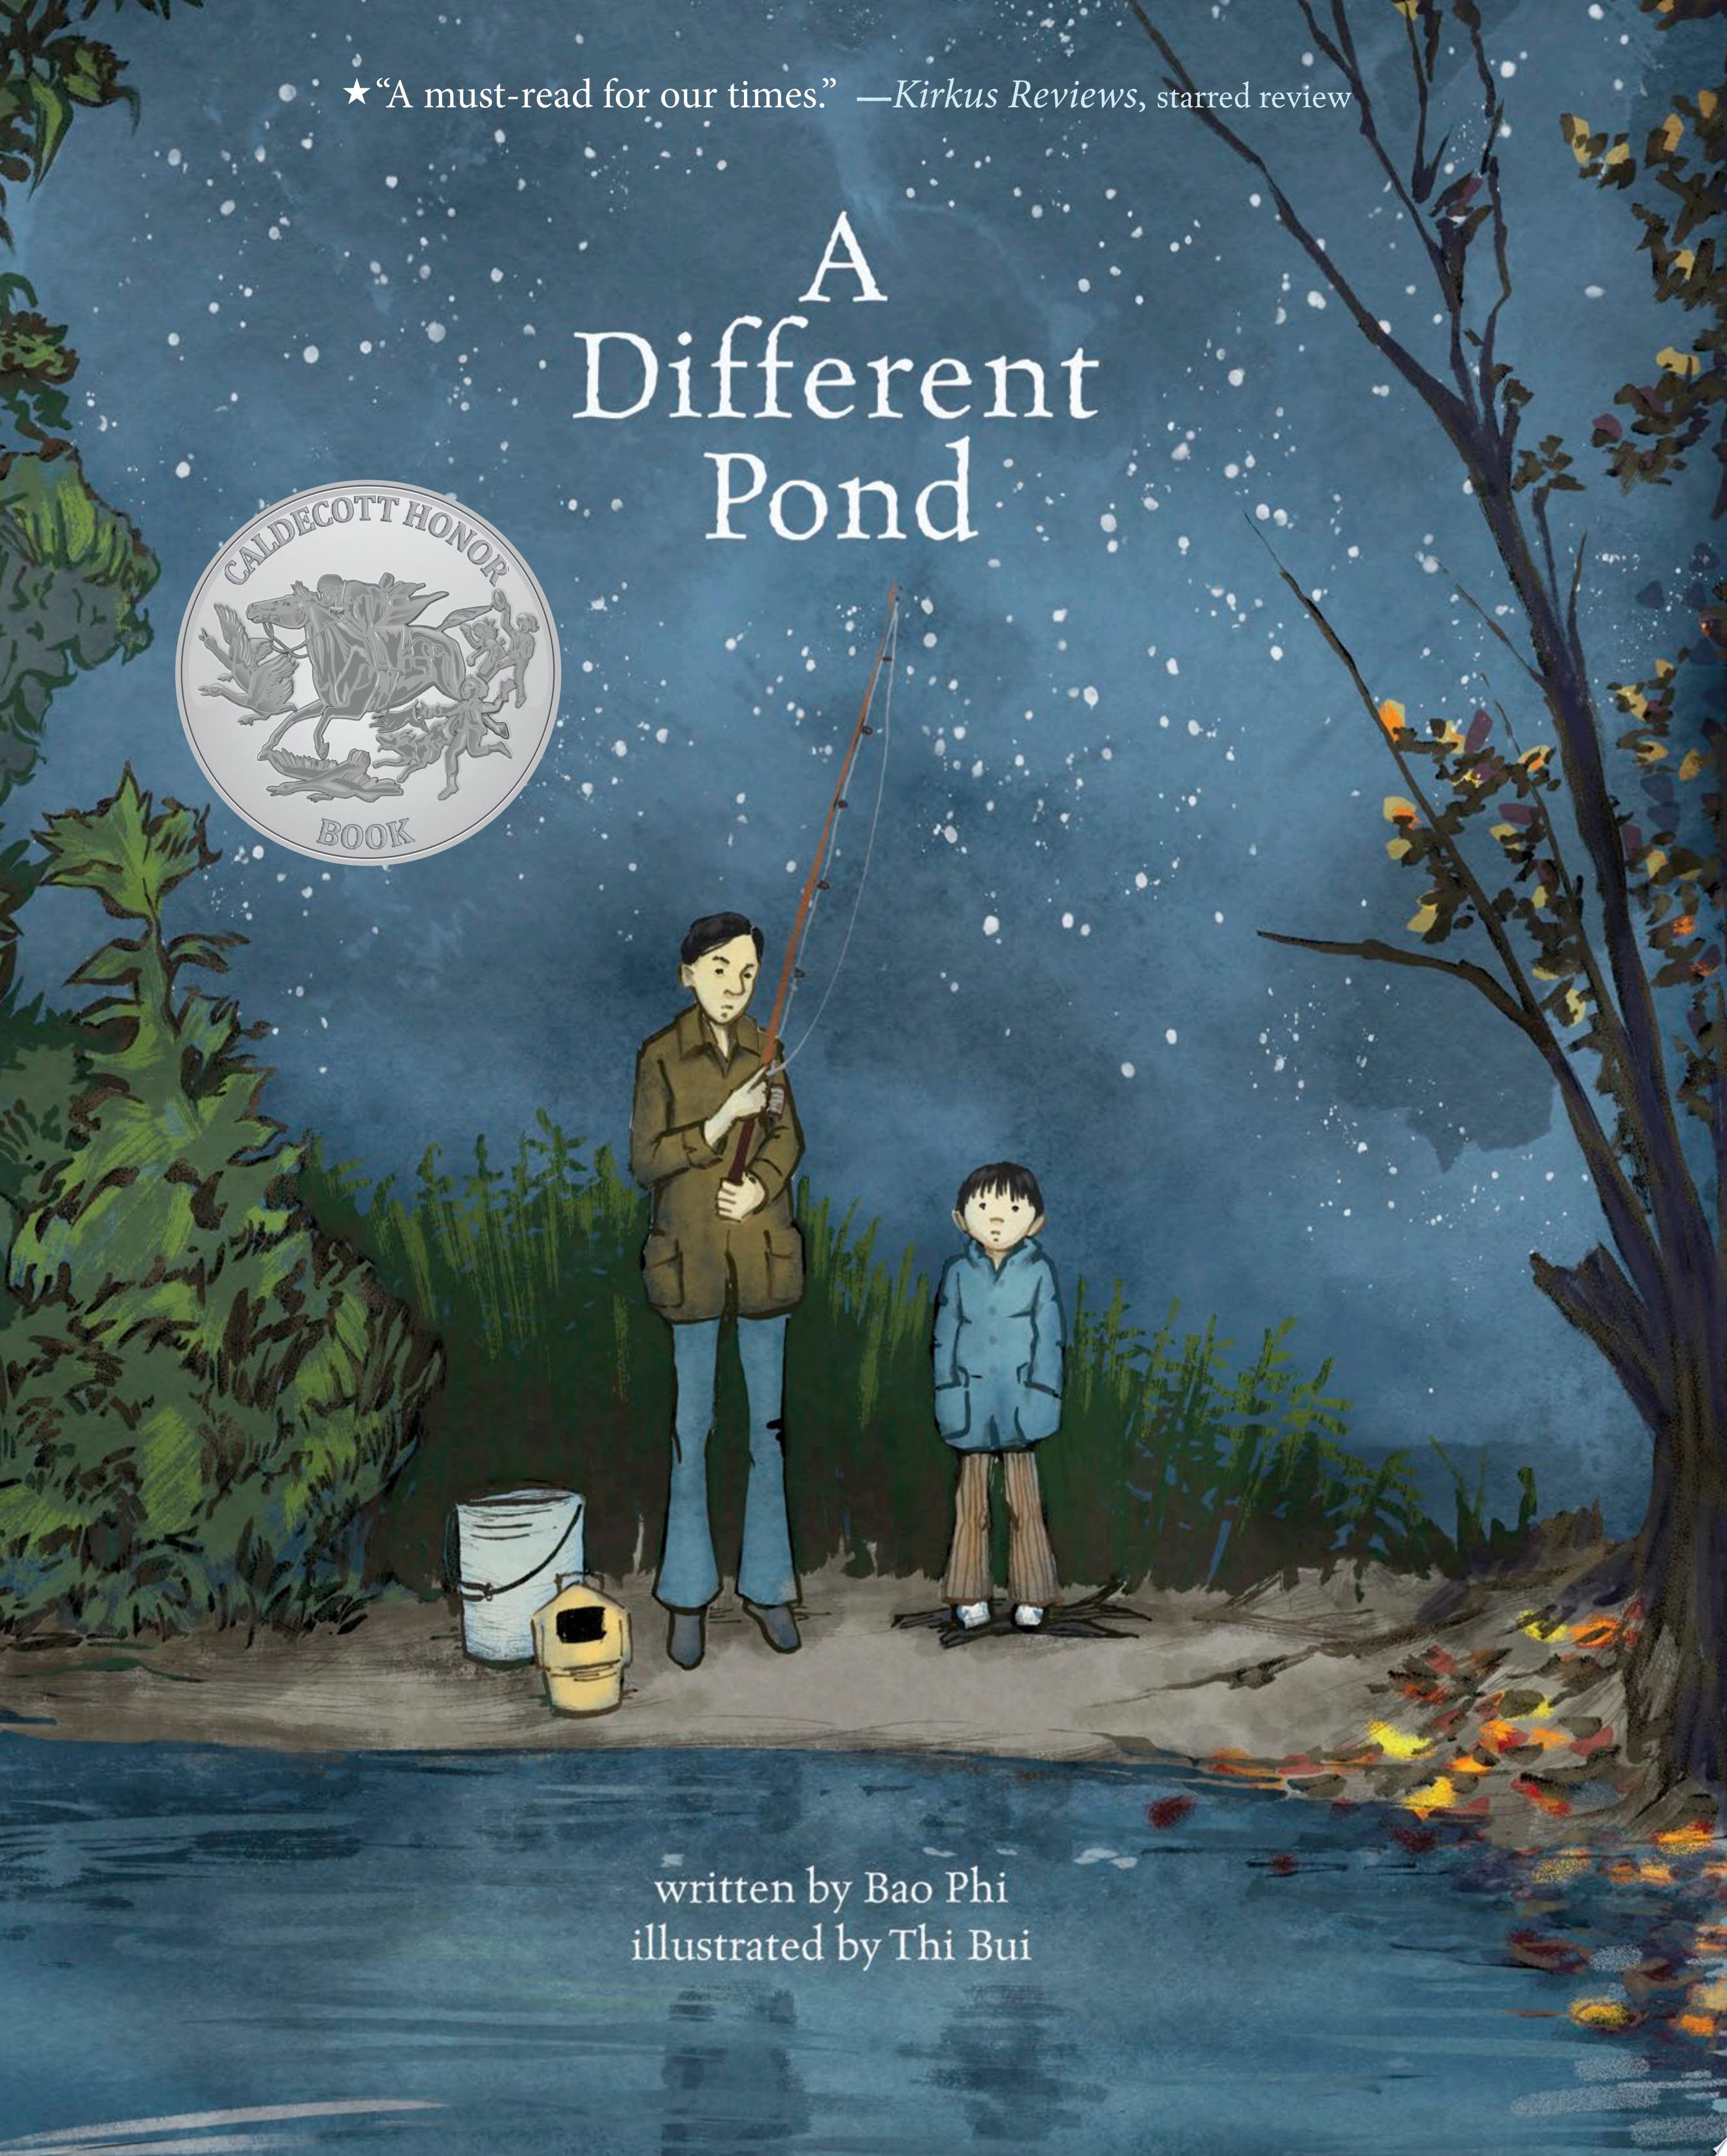 Image for "A Different Pond"